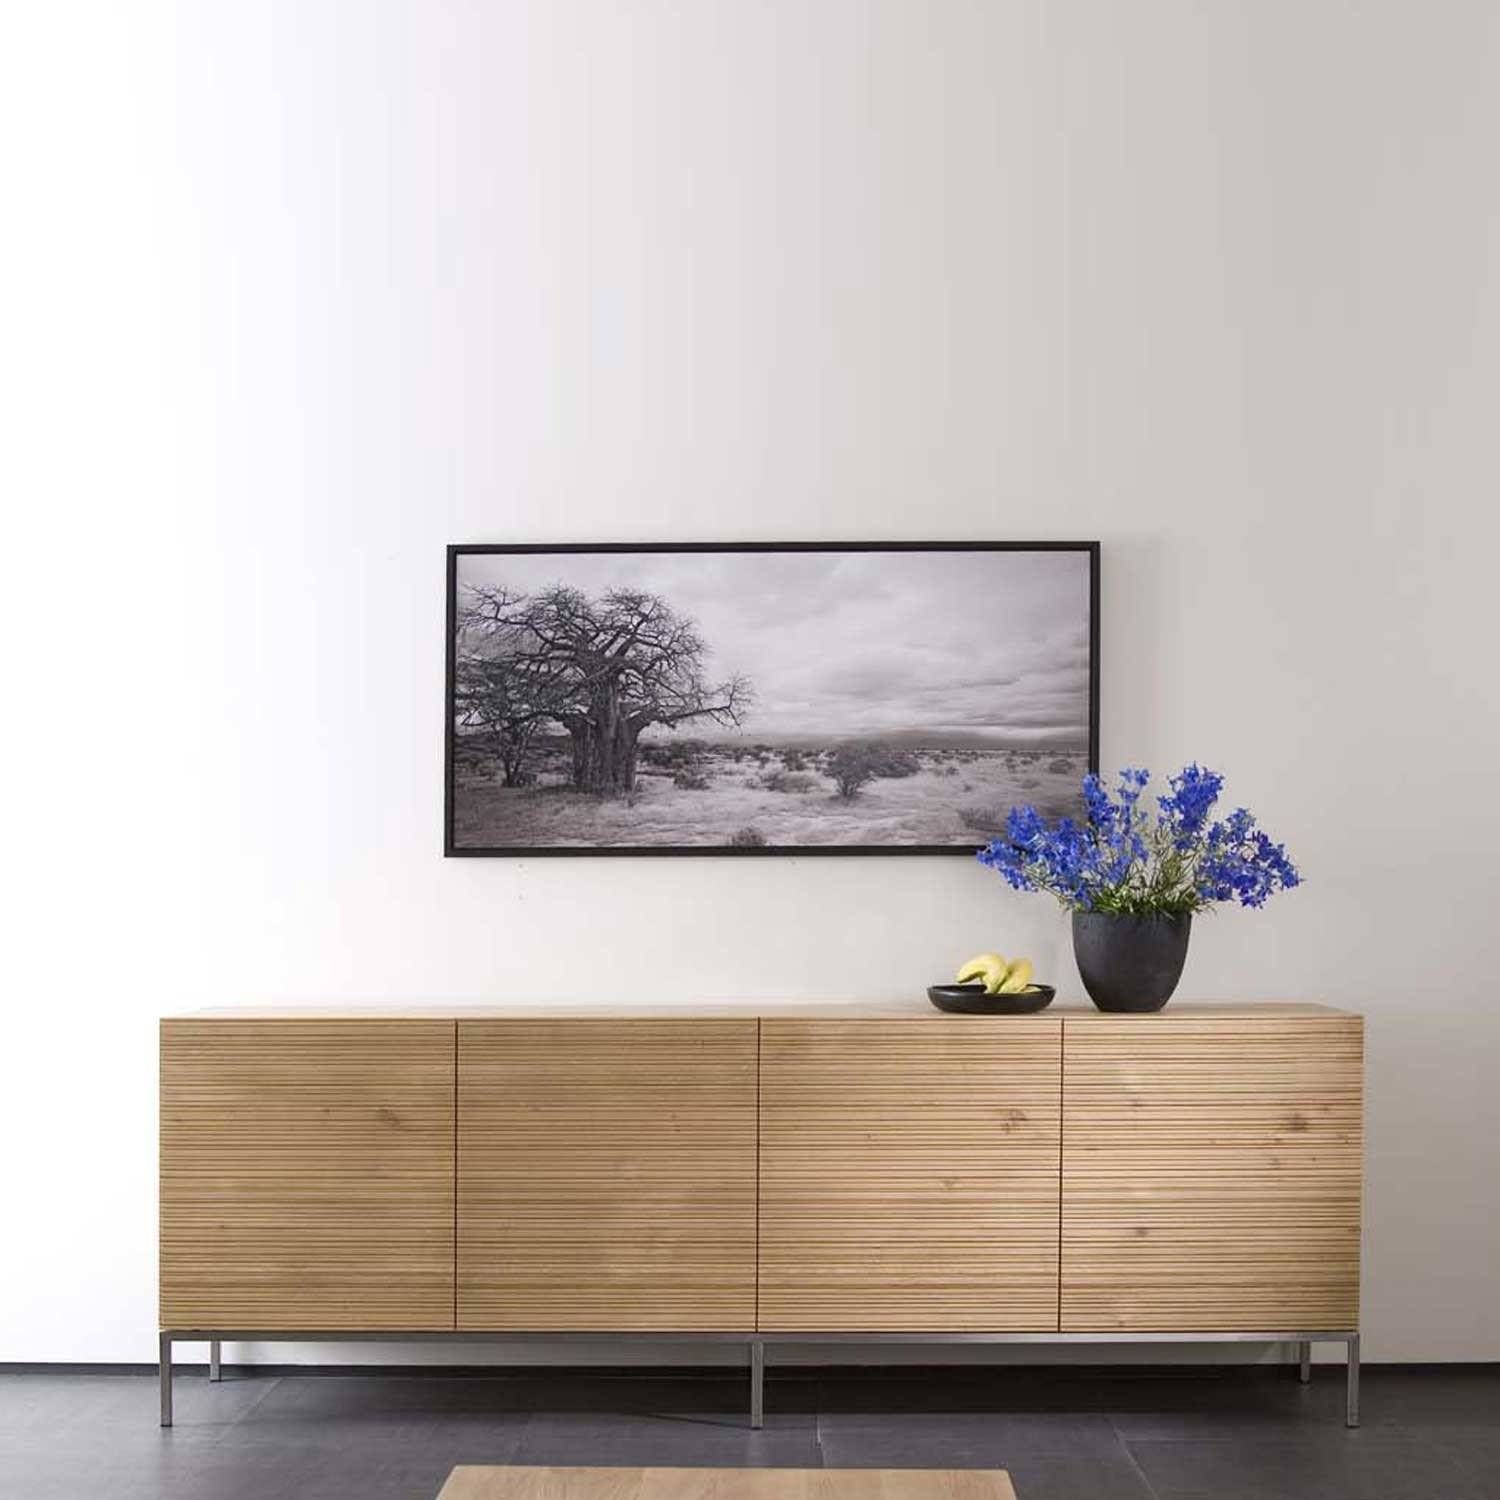 Ethnicraft Stonecut Oak Sideboards | Solid Wood Furniture In Low Wooden Sideboards (View 5 of 15)